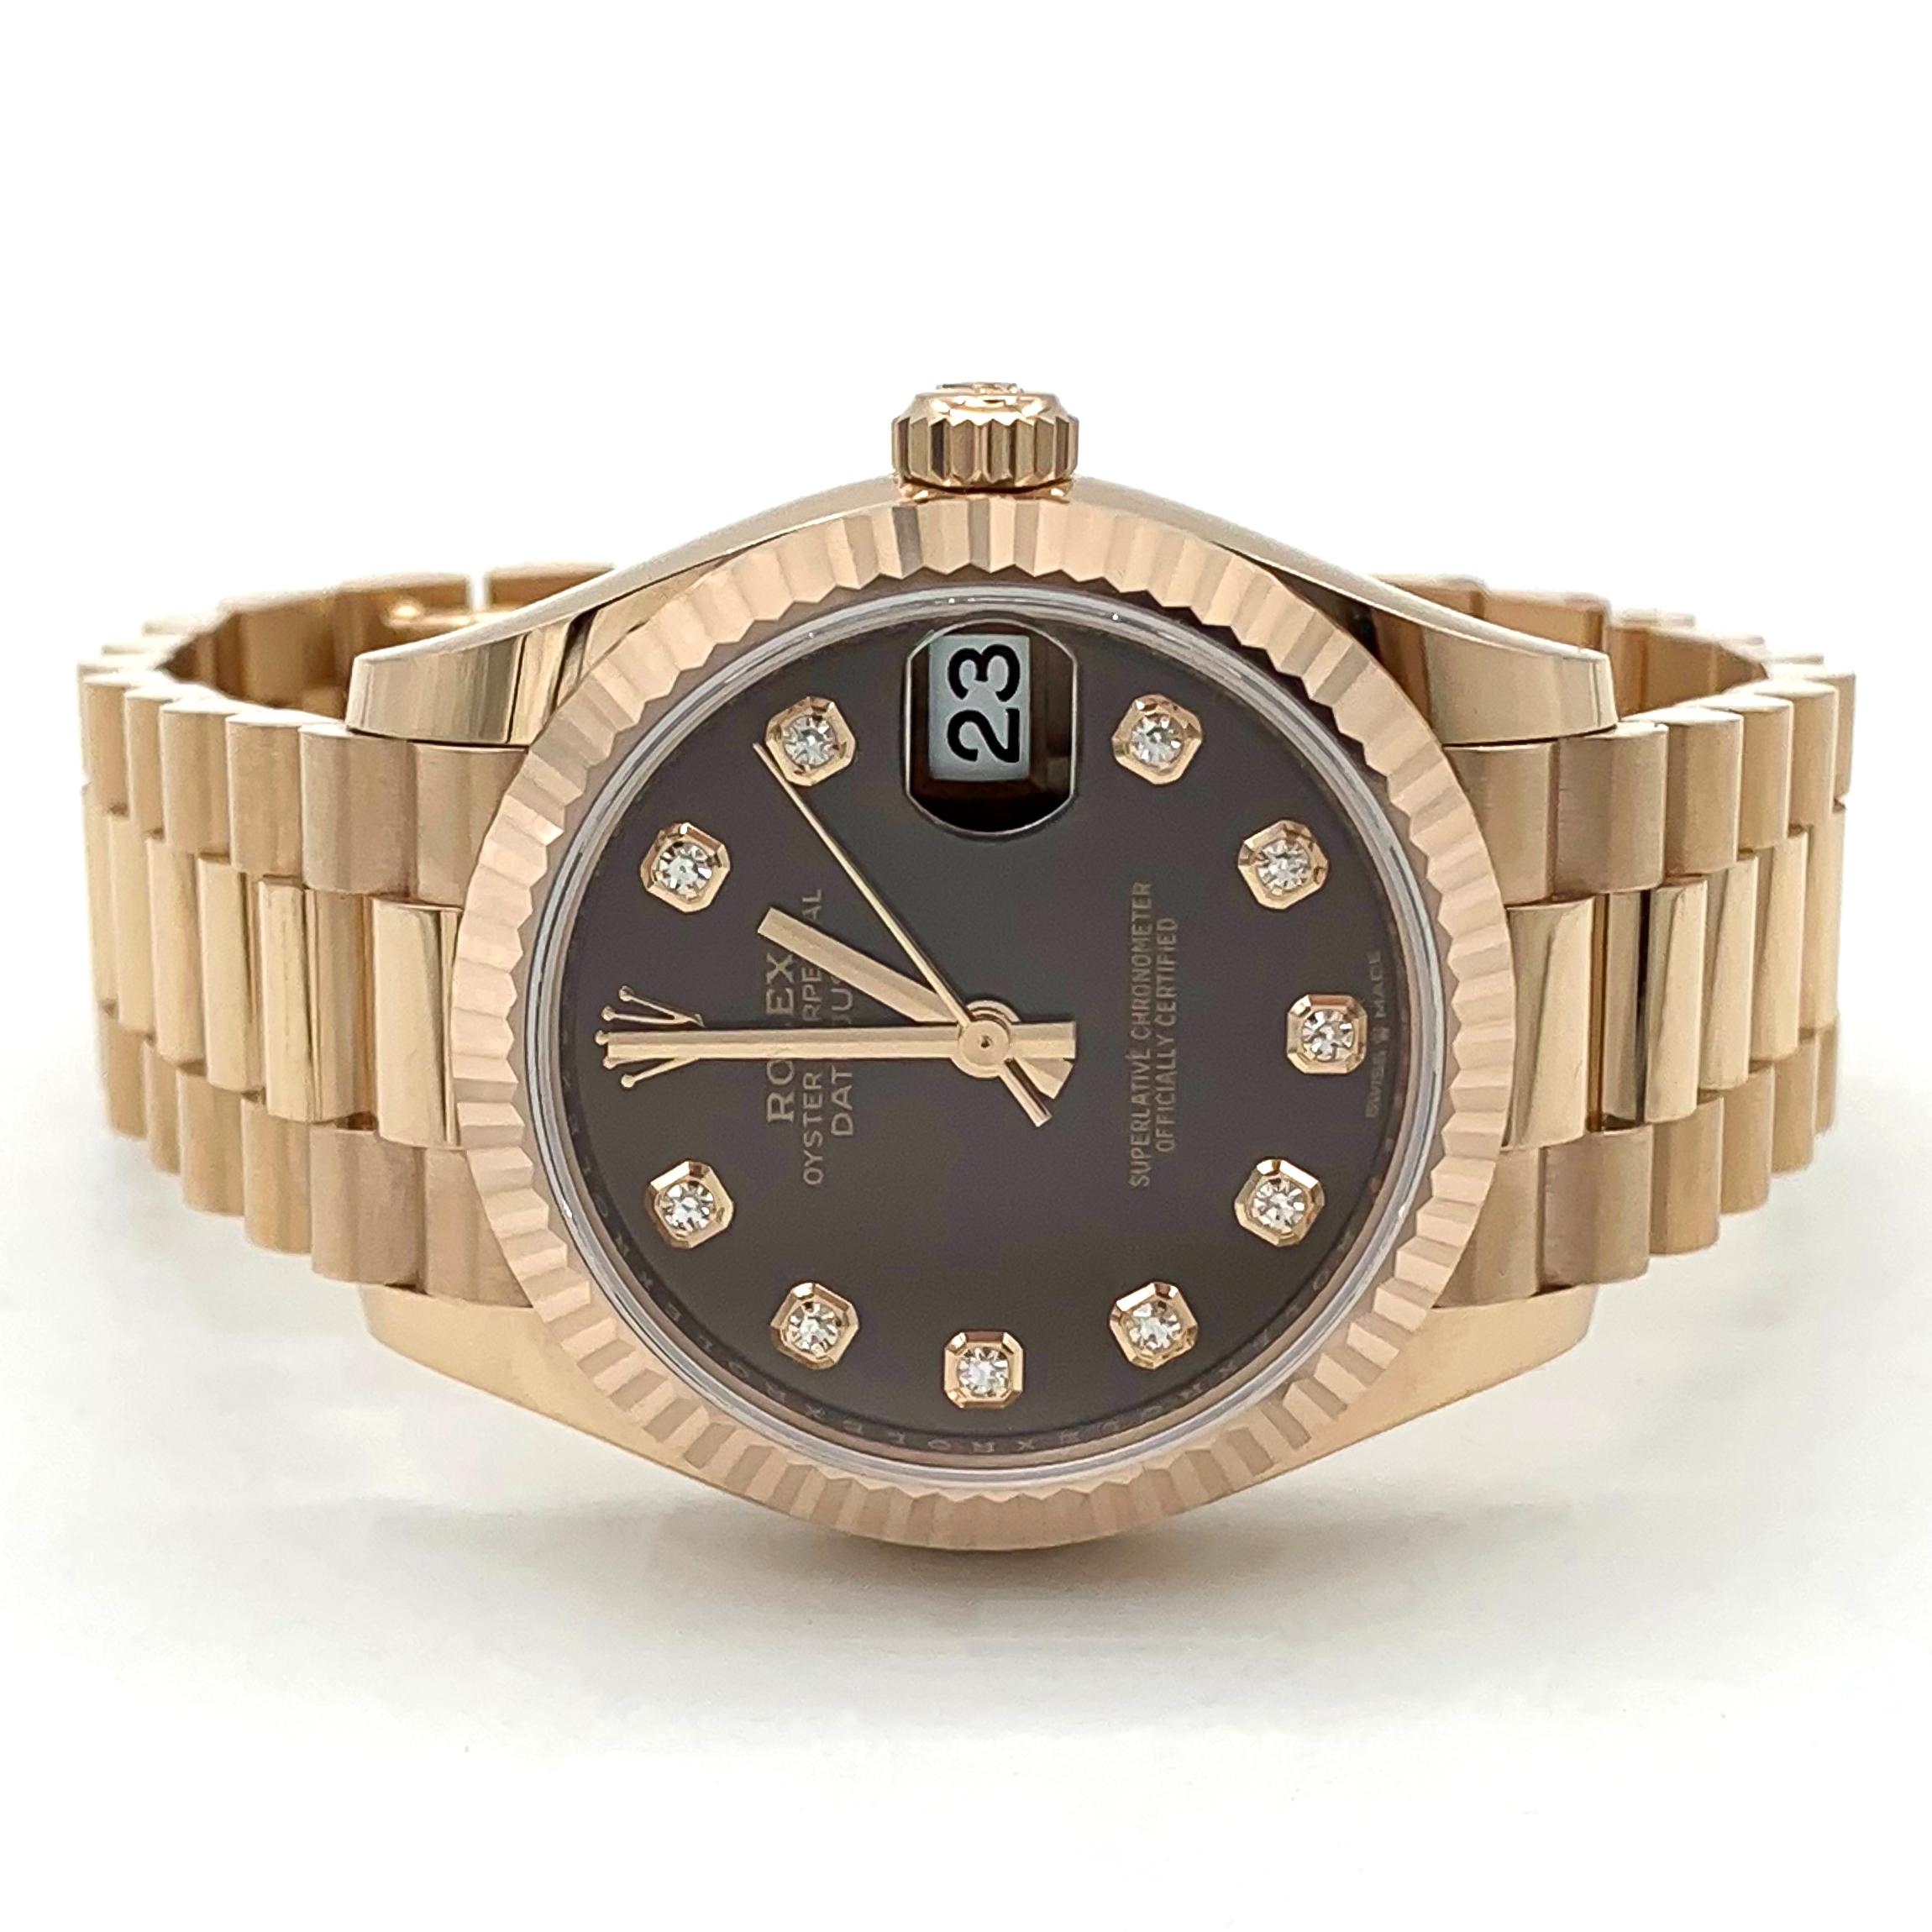 Rolex Everose Gold Datejust 31 Watch - Fluted Bezel - Chocolate Diamond Dial - President Bracelet

31mm 18K Everose gold case, screw-down crown with twinlock double waterproofness system, fluted bezel, scratch-resistant sapphire crystal with cyclops